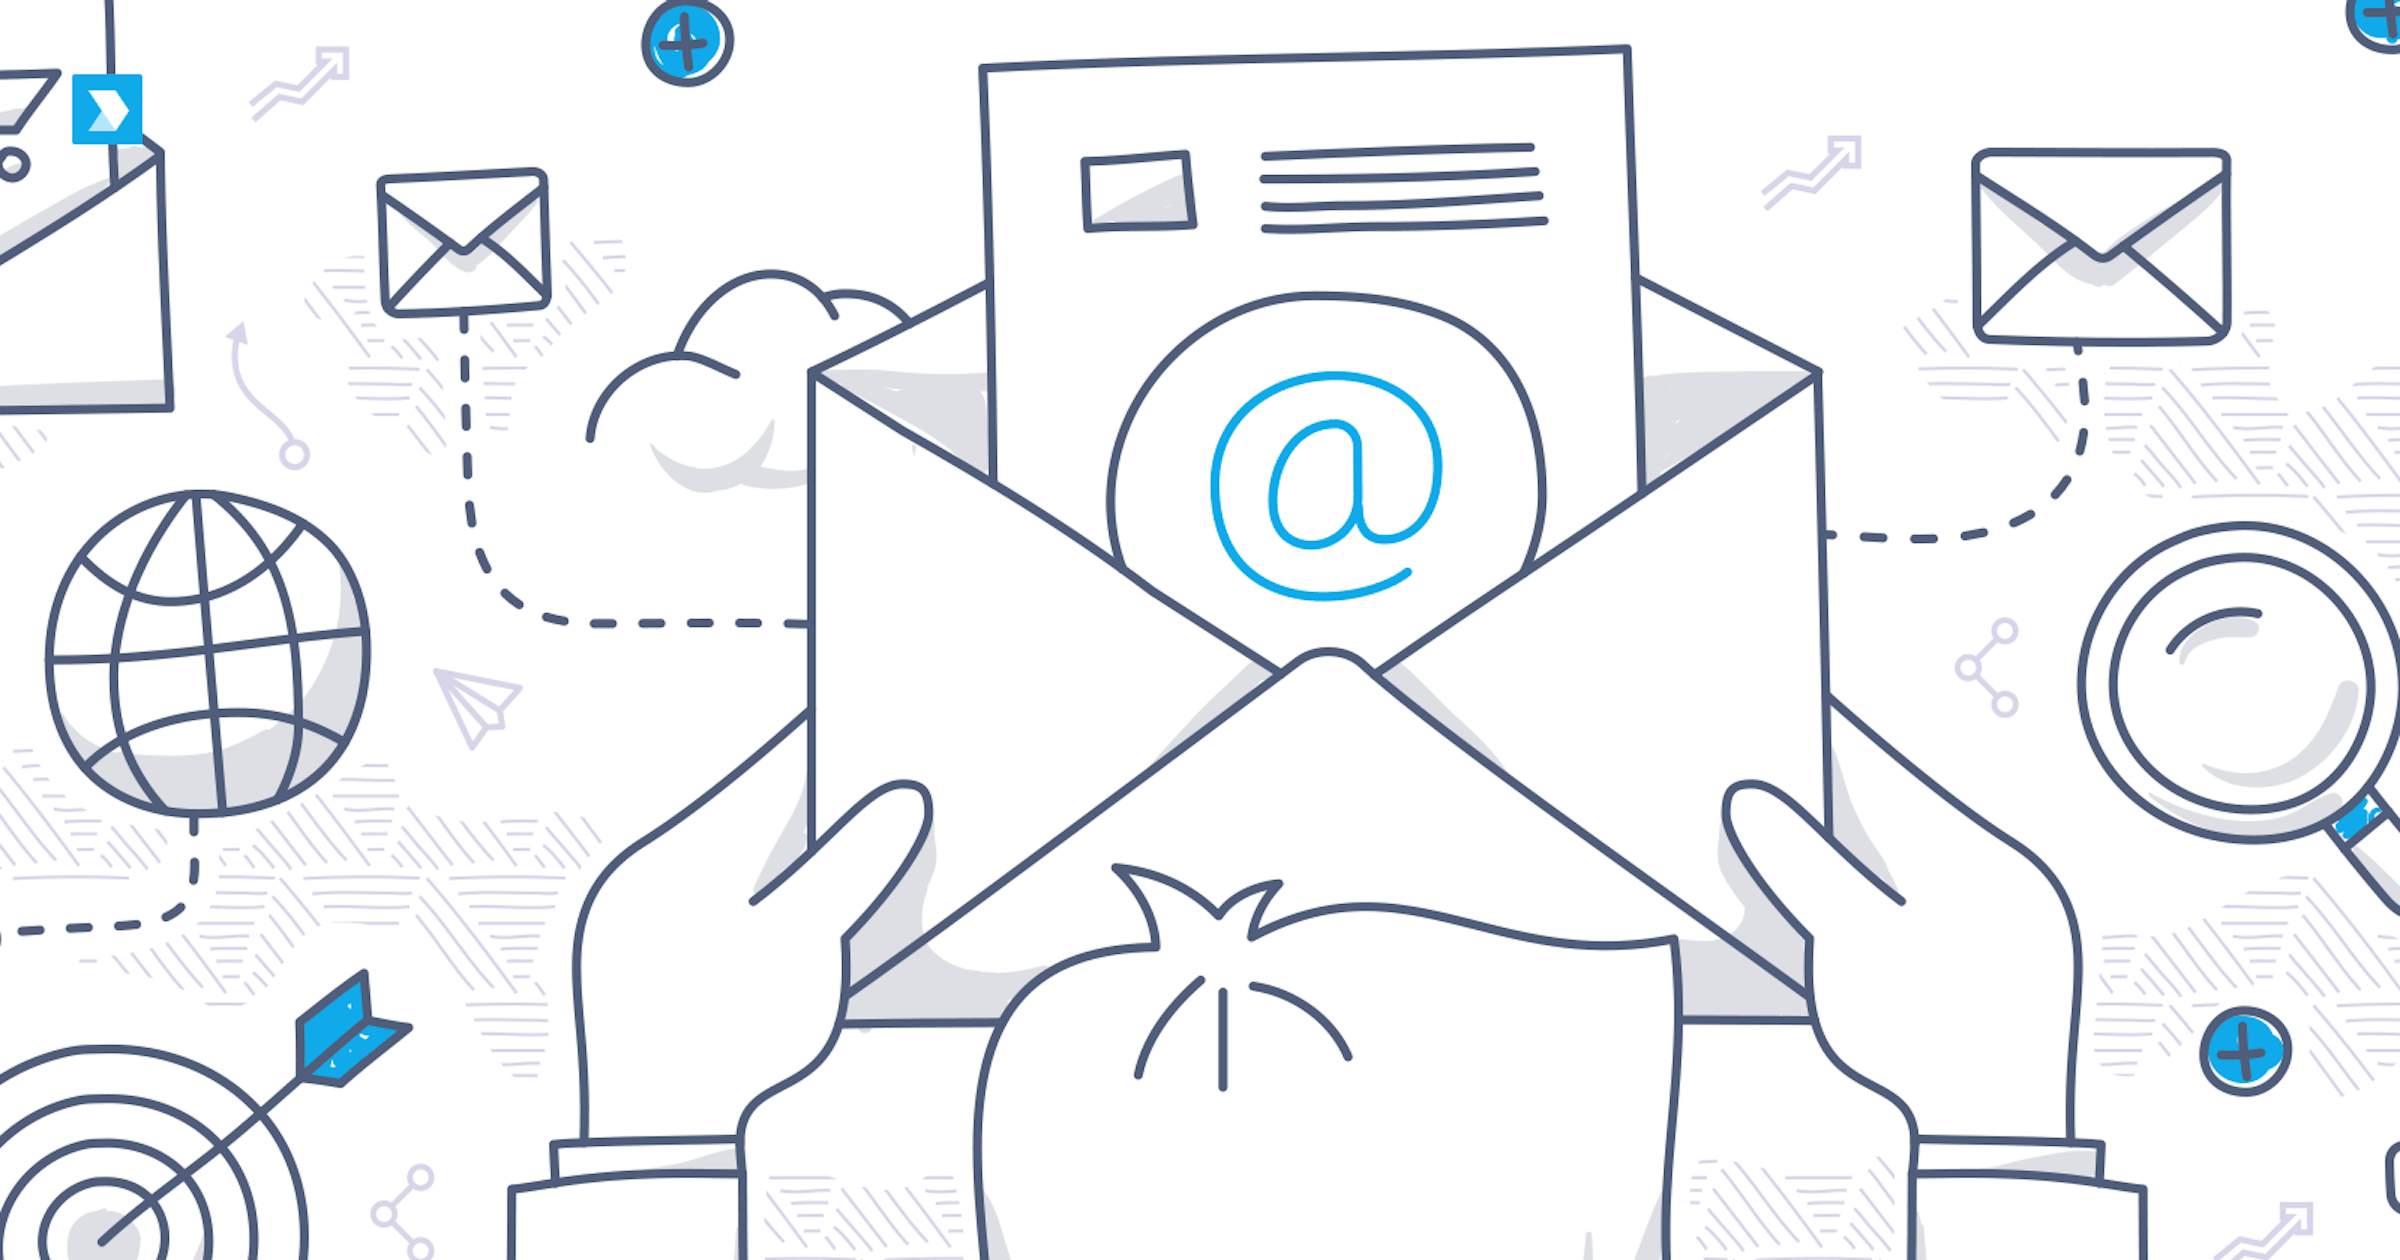 NEW! 50+ Wild Email Marketing Statistics You Need to See